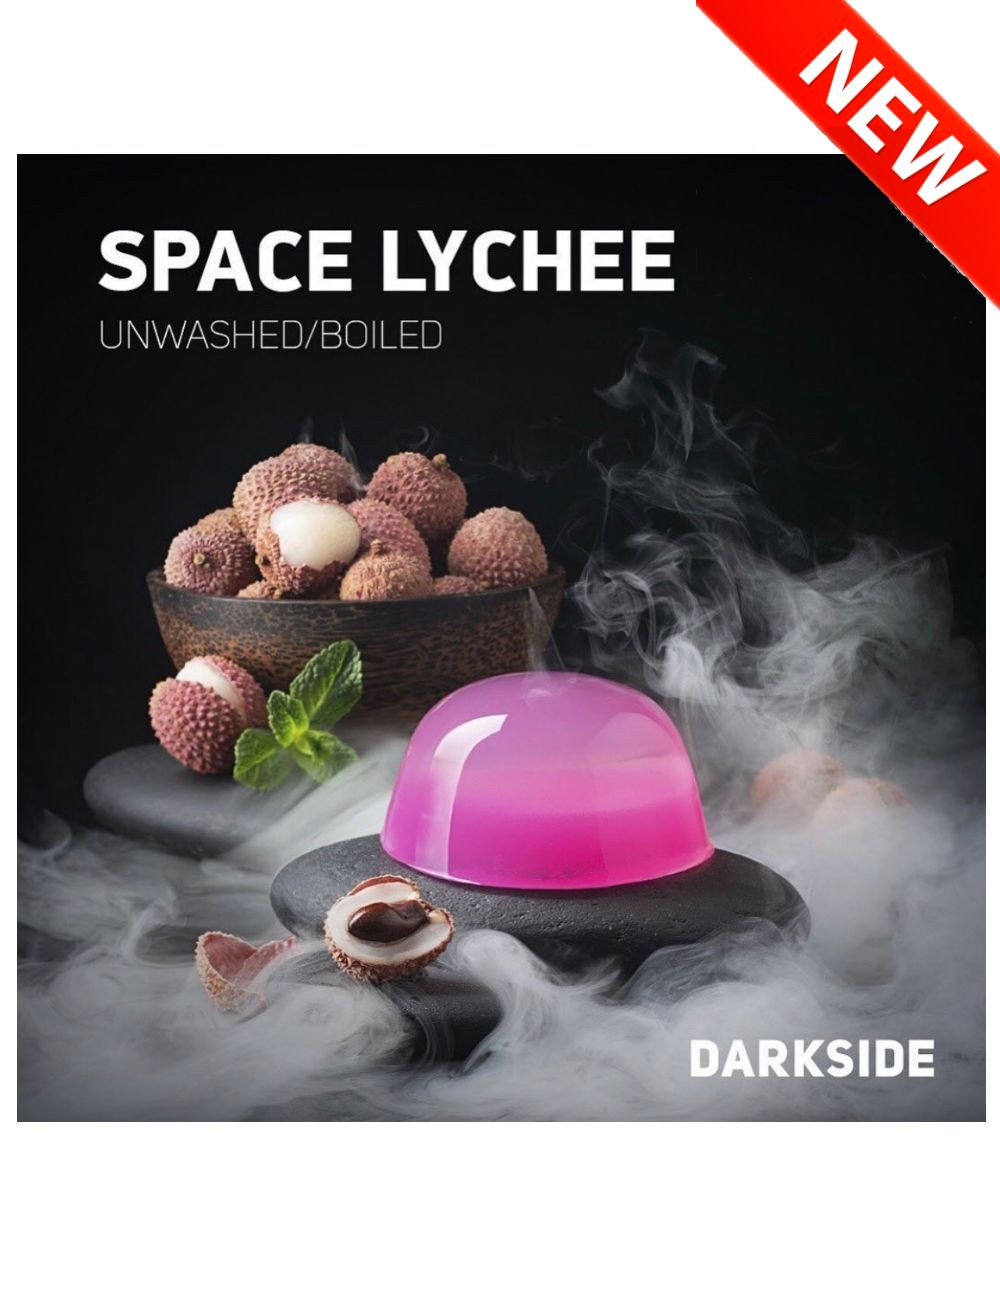 SPACE LYCHEE